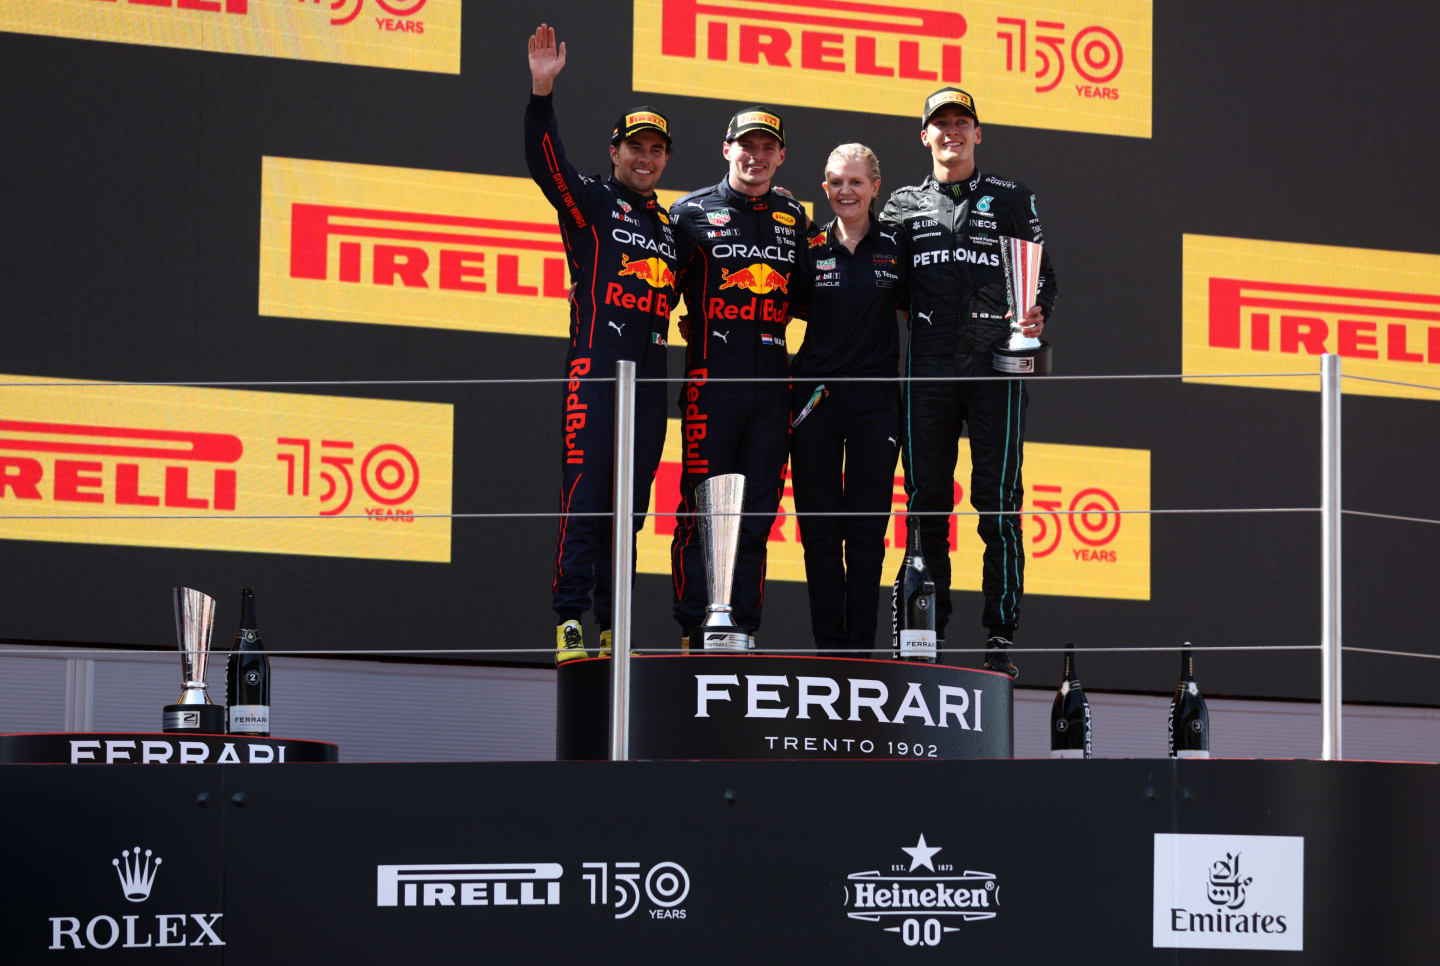 BARCELONA, SPAIN - MAY 22: Race winner Max Verstappen of the Netherlands and Oracle Red Bull Racing, Second placed Sergio Perez of Mexico and Oracle Red Bull Racing and Third placed George Russell of Great Britain and Mercedes celebrate on the podium during the F1 Grand Prix of Spain at Circuit de Barcelona-Catalunya on May 22, 2022 in Barcelona, Spain. (Photo by Alex Pantling - Formula 1/Formula 1 via Getty Images)